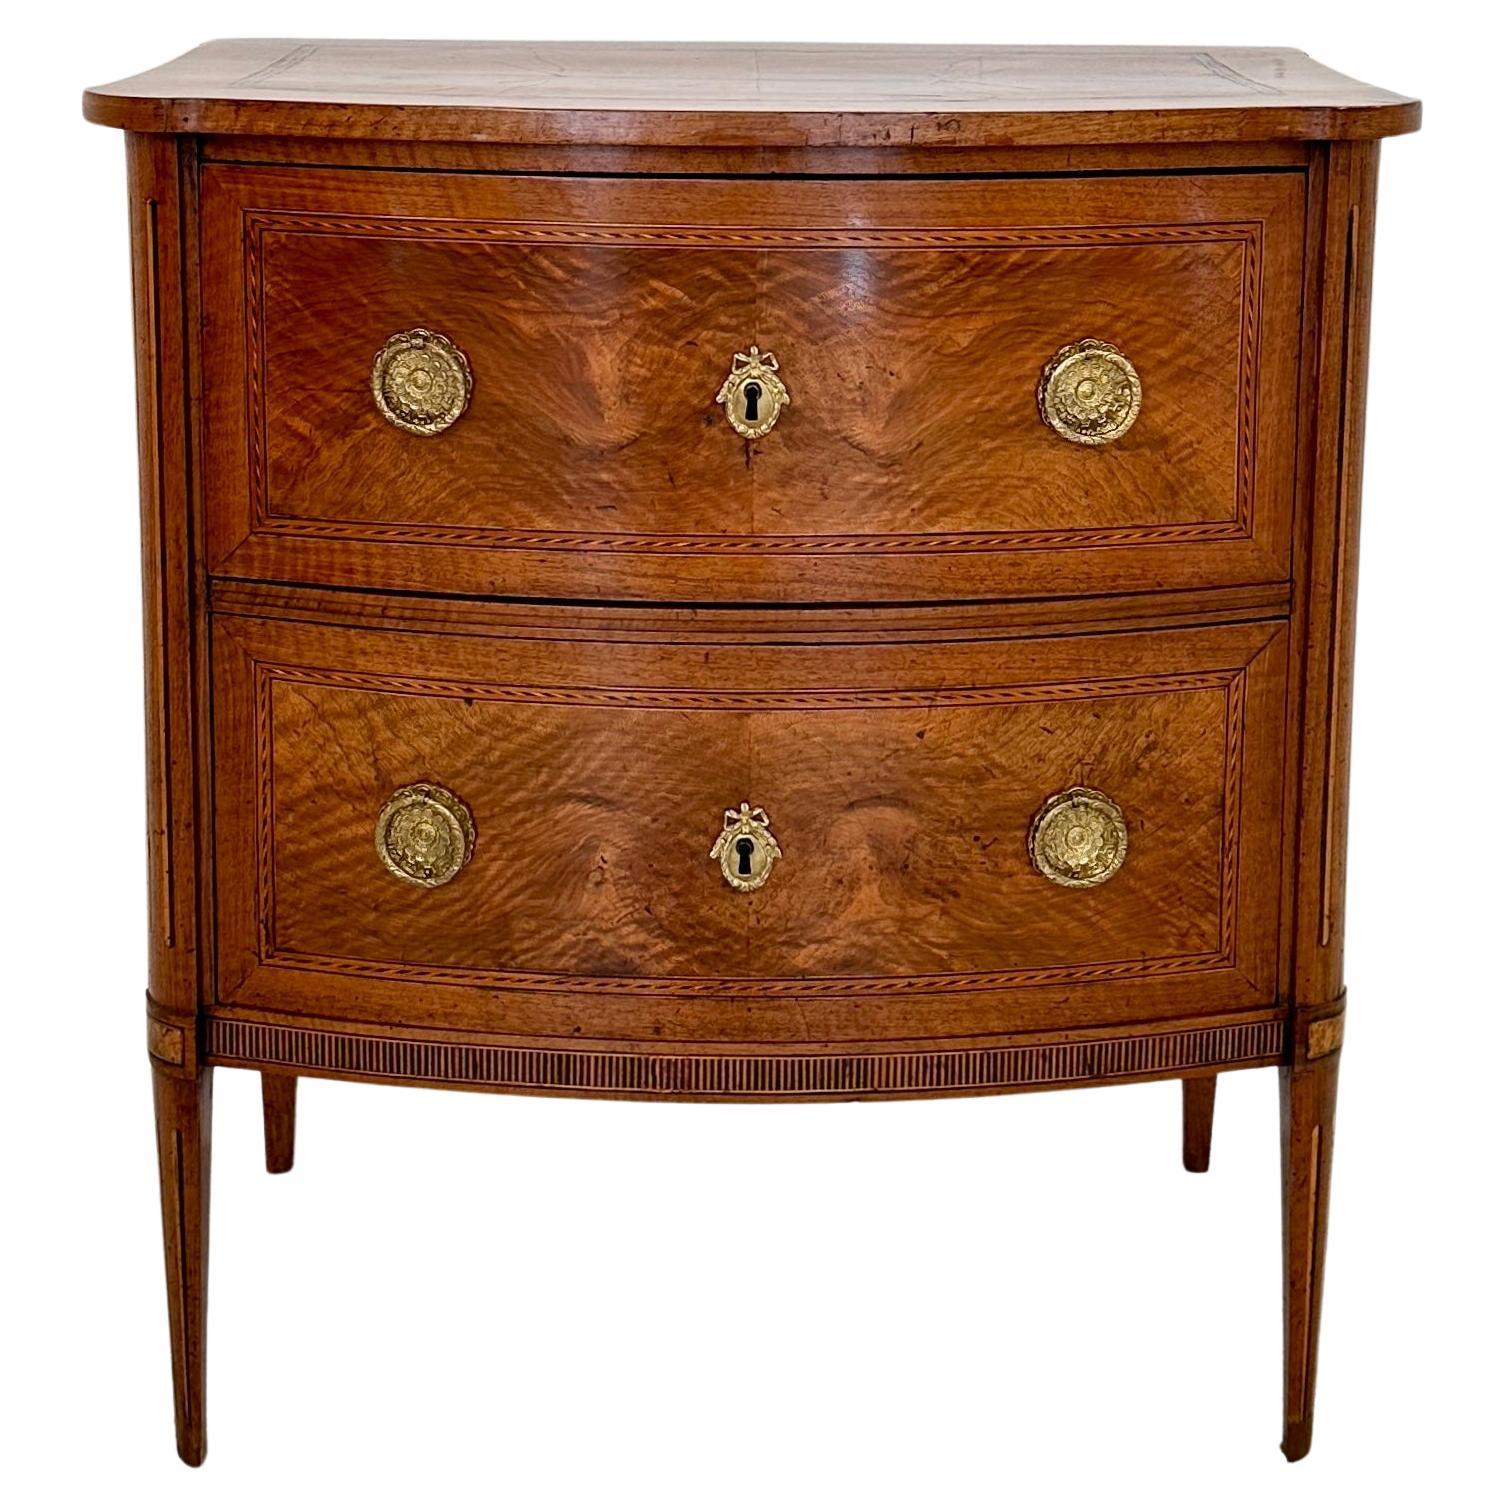 Small 18th Century German Louis Seize Commode in Walnut with 2 Drawers, 1790